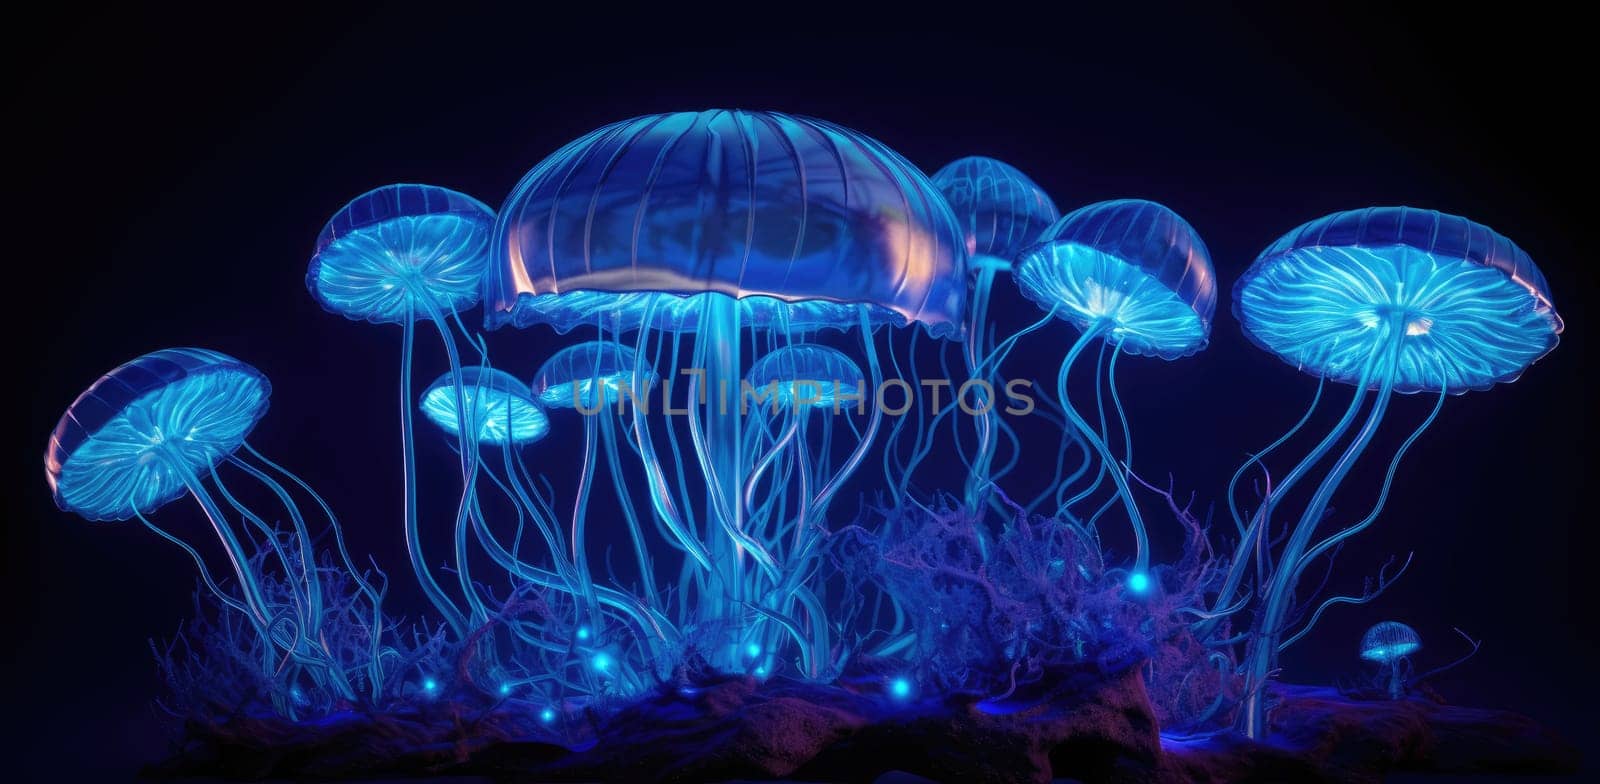 Transparent mushrooms or jellyfish. Microcosm of living organisms. The concept of nature